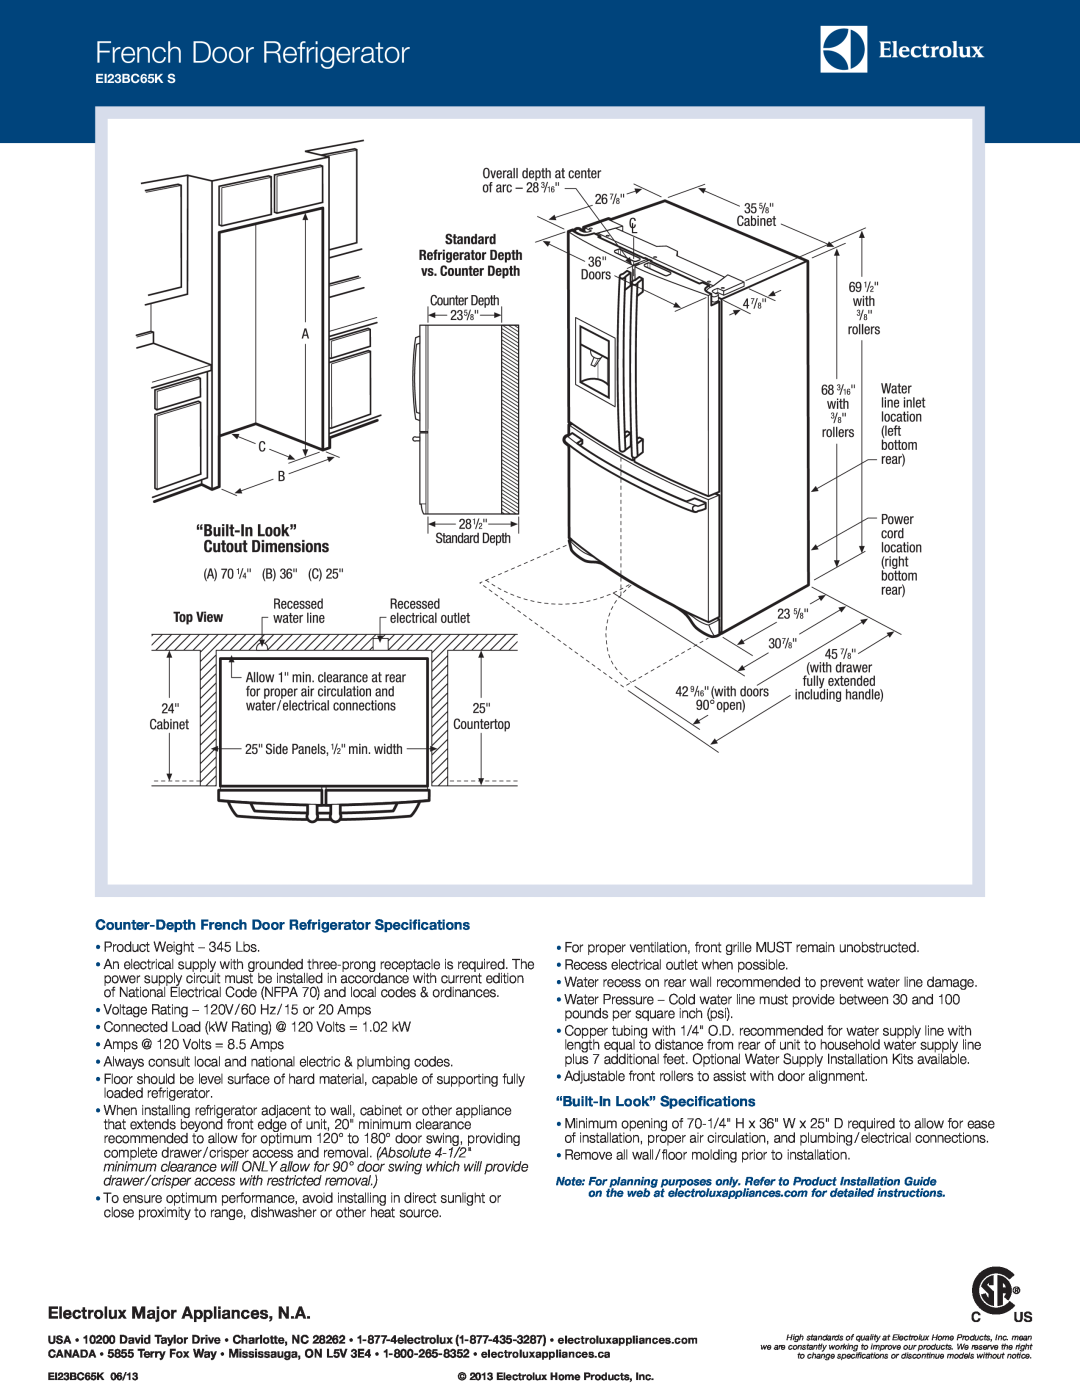 Electrolux EI23BC65K S French Door Refrigerator, Electrolux Major Appliances, N.A, “Built-In Look” Specifications 